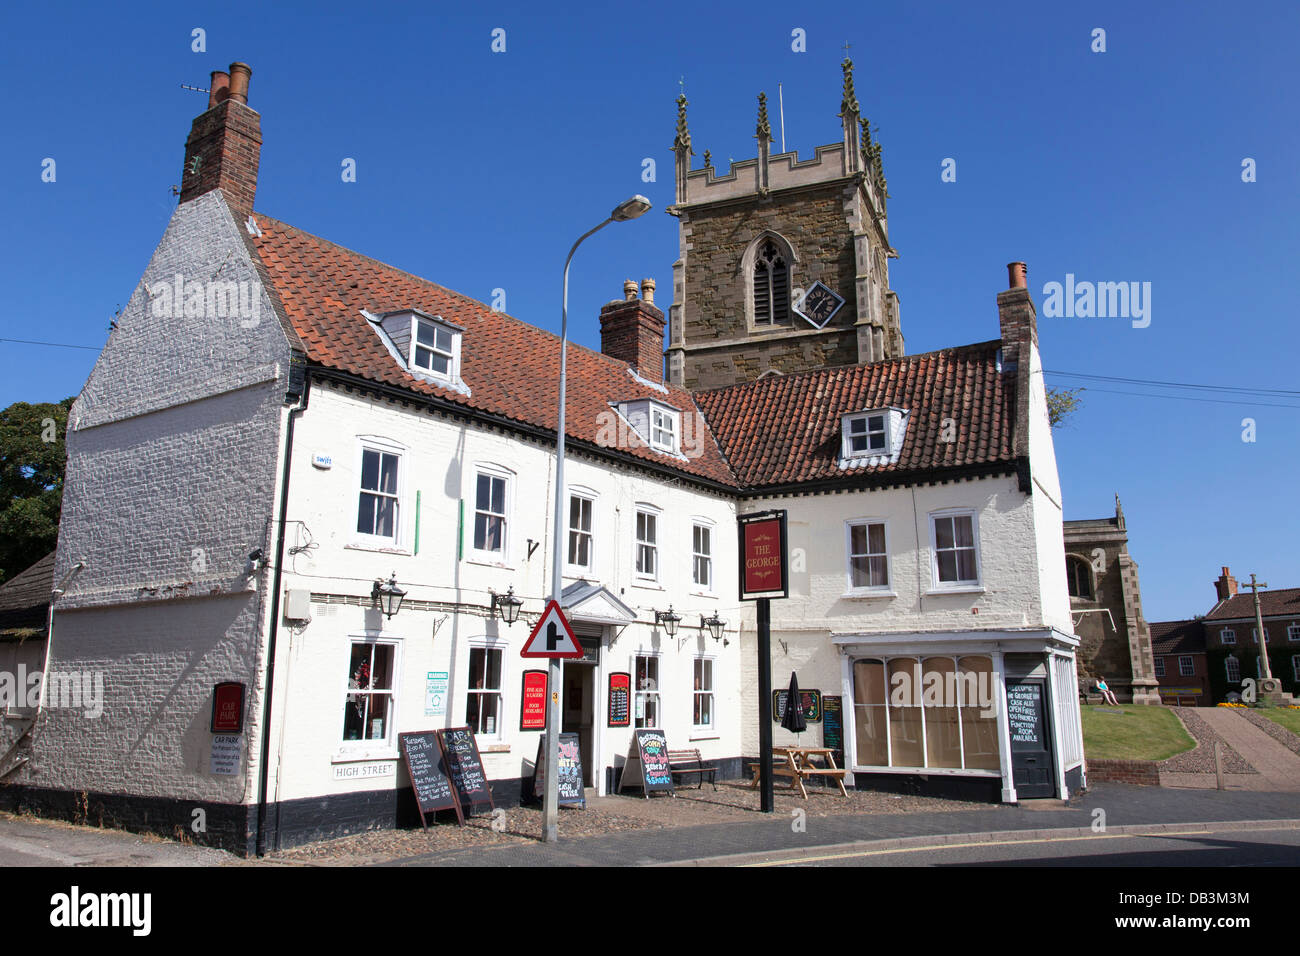 The George public house and church in Alford, Lincolnshire, England, U.K. Stock Photo